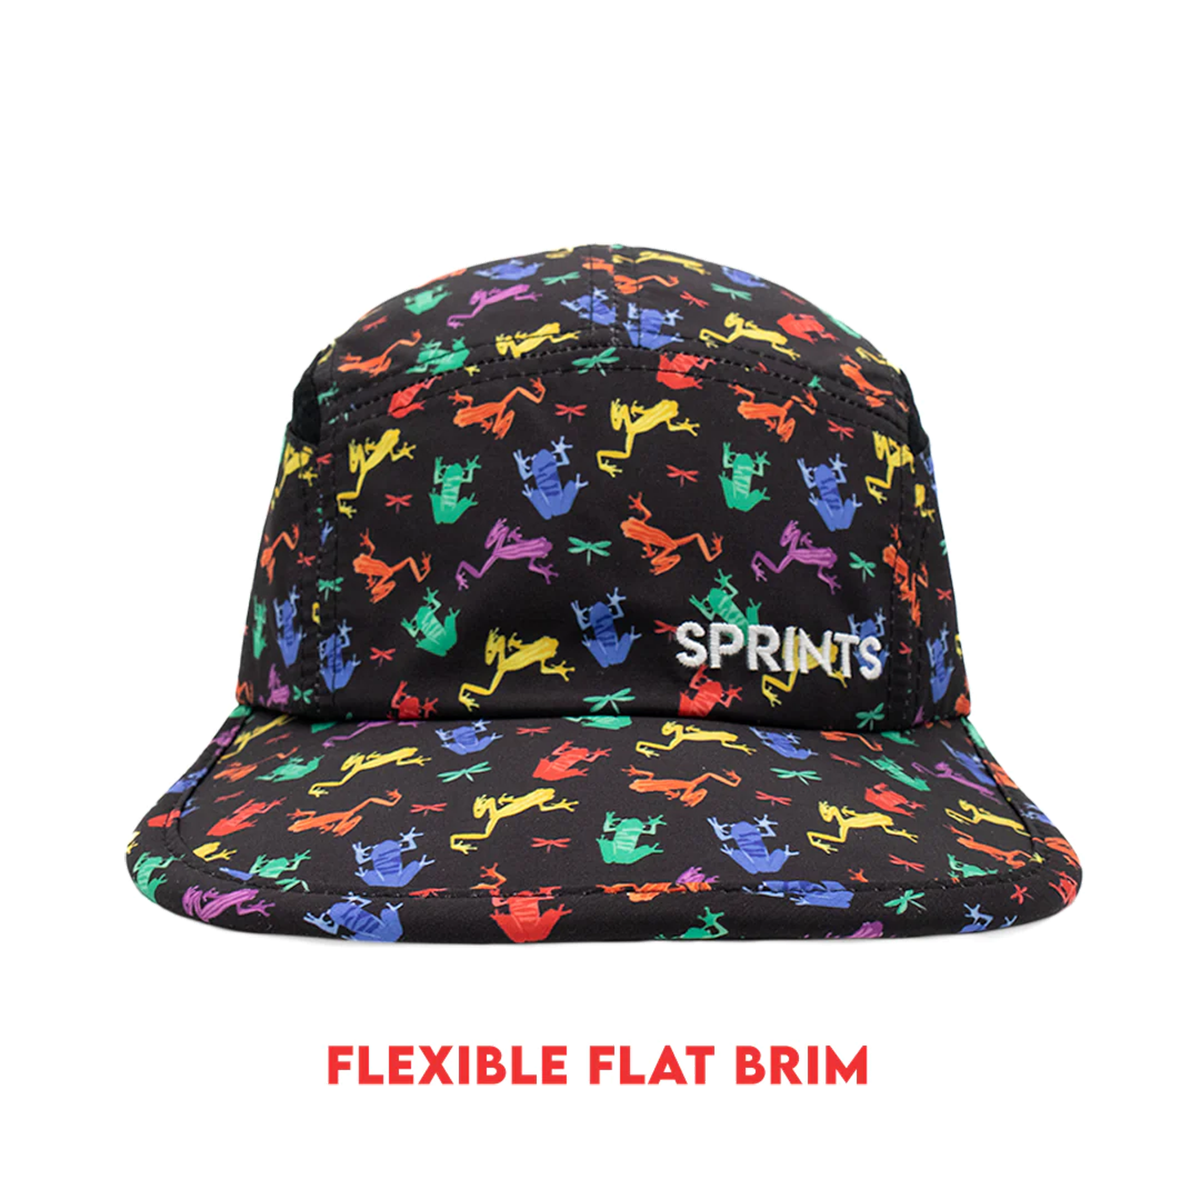 Sprints 5 Panel Hat, , large image number null